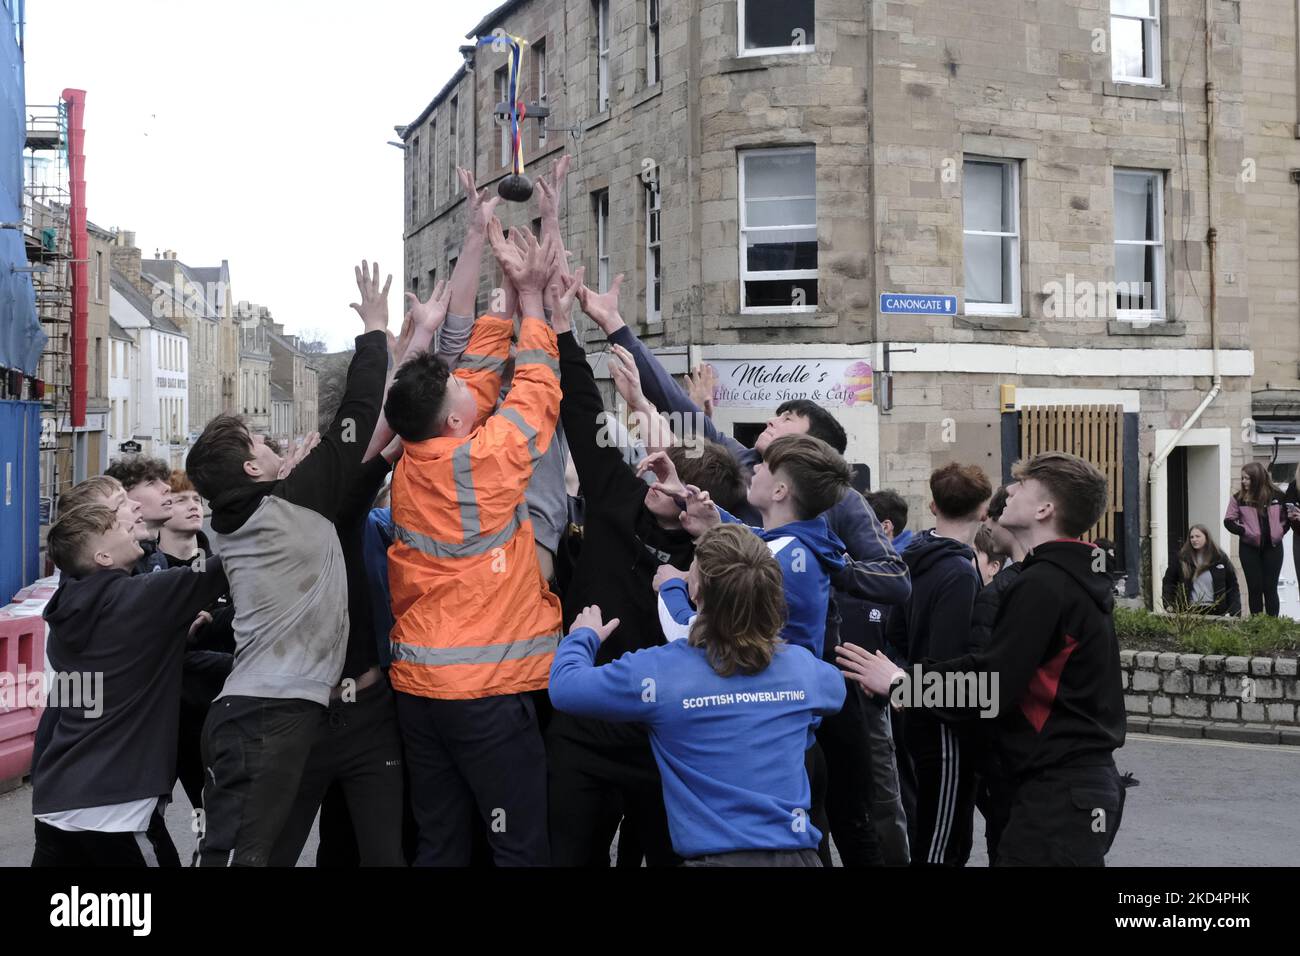 Jedburgh, Thursday 10 March 2022. A group of youths challenge for the â€œSchule Baâ€ the first to be â€œhailedâ€ at the start of the annual 'Fastern Eve Handba' event in Jedburgh's High Street in the Scottish Borders on March 10, 2022 in Jedburgh, Scotland. The annual event, which started in the 1700's, takes place today and involves two teams, the Uppies (residents from the higher part of Jedburgh) and the Doonies (residents from the lower part of Jedburgh) getting the ball to either the top or bottom of the town. The ball, which is made of leather, stuffed with straw and decorated with rib Stock Photo